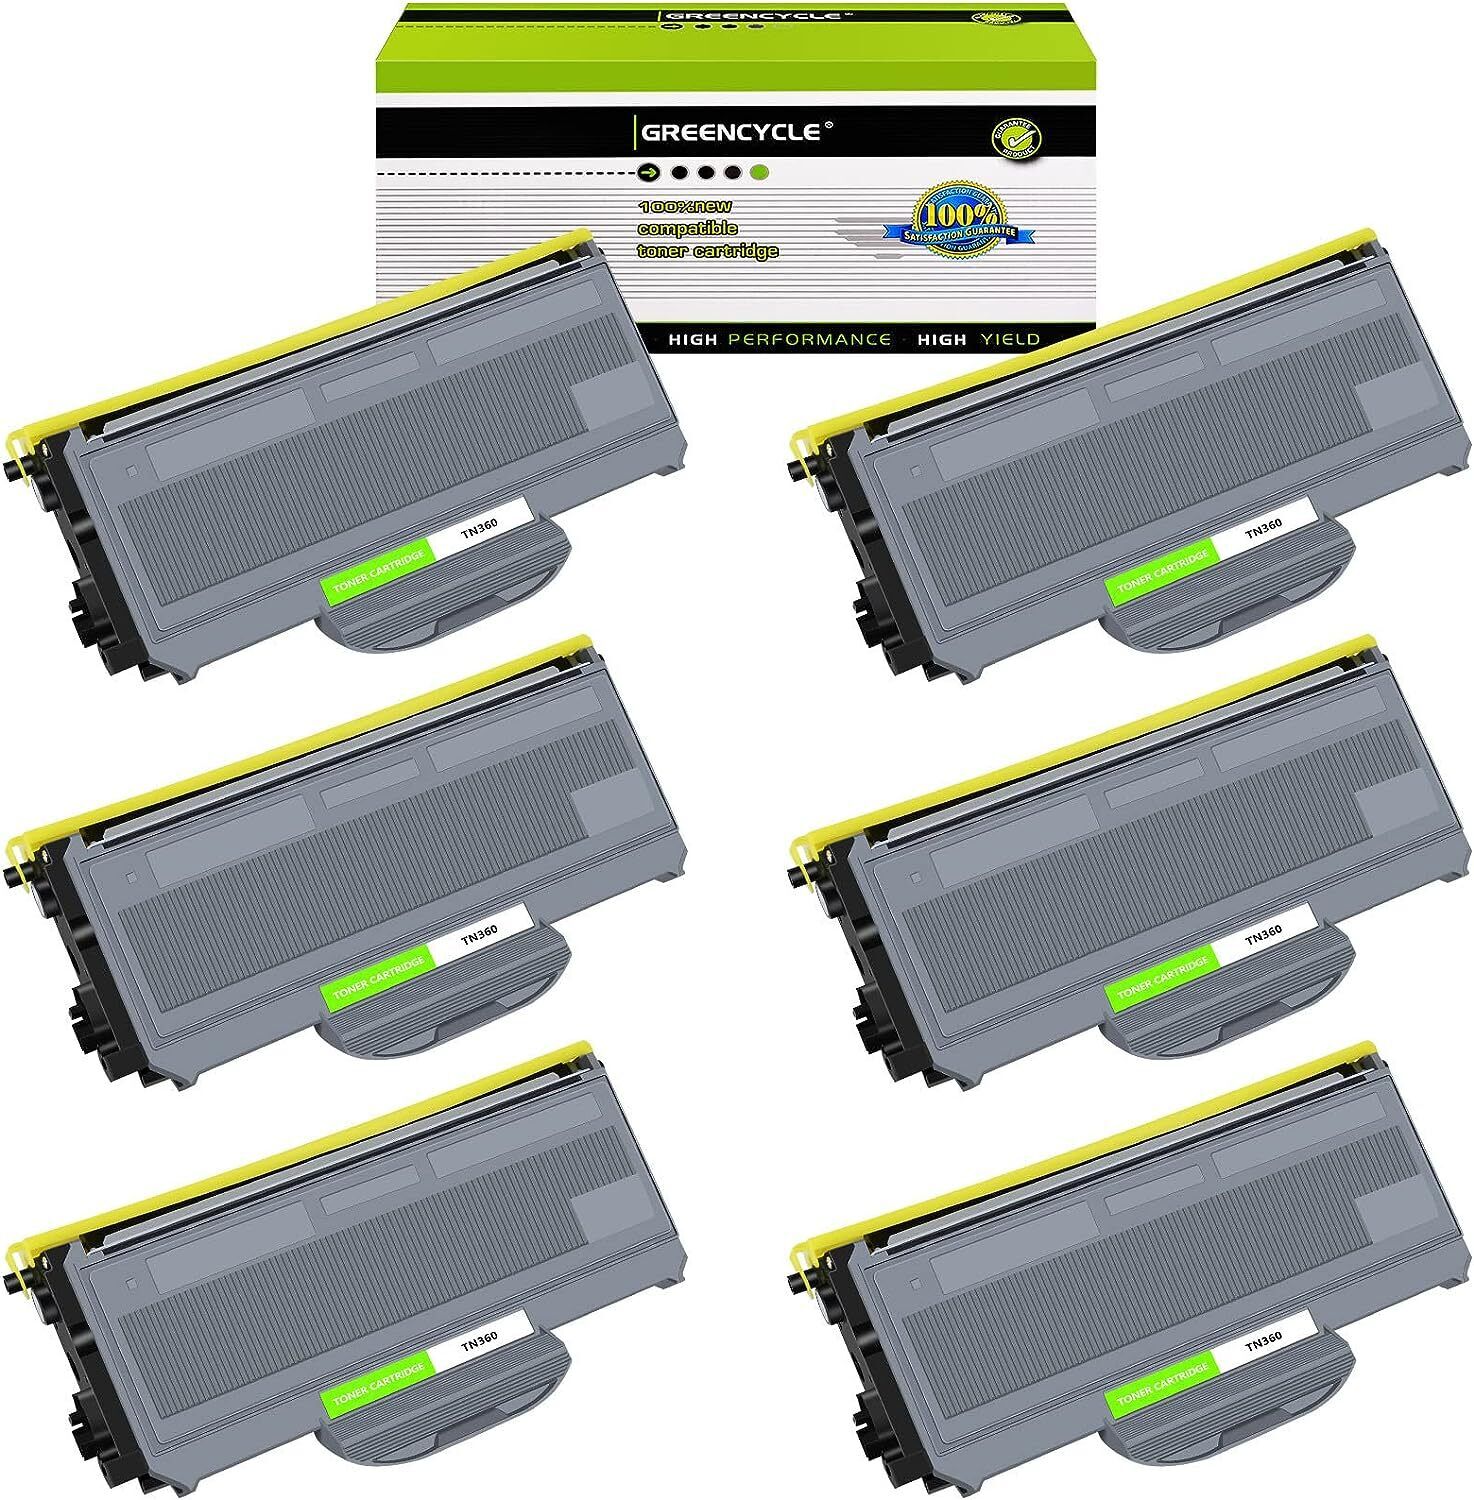 6PK greencycle MFC-7340 High Yield Compatible Toner Cartridge for Brother TN360